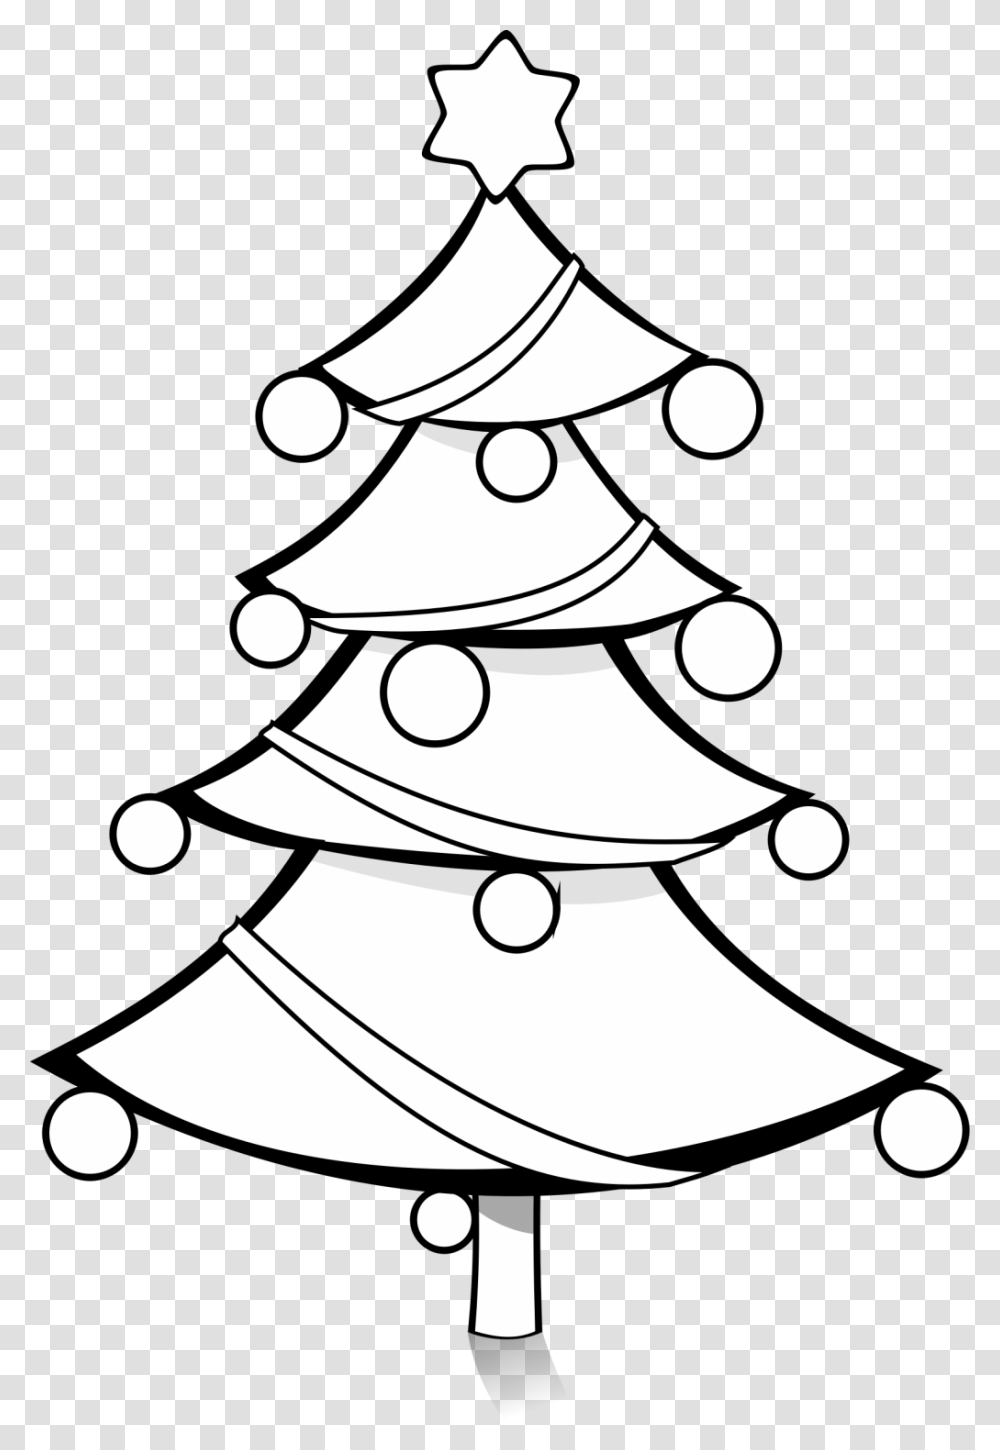 Baby Nursery Winsome Black And White Xmas Tree Clipart Kid, Plant, Ornament, Christmas Tree, Star Symbol Transparent Png